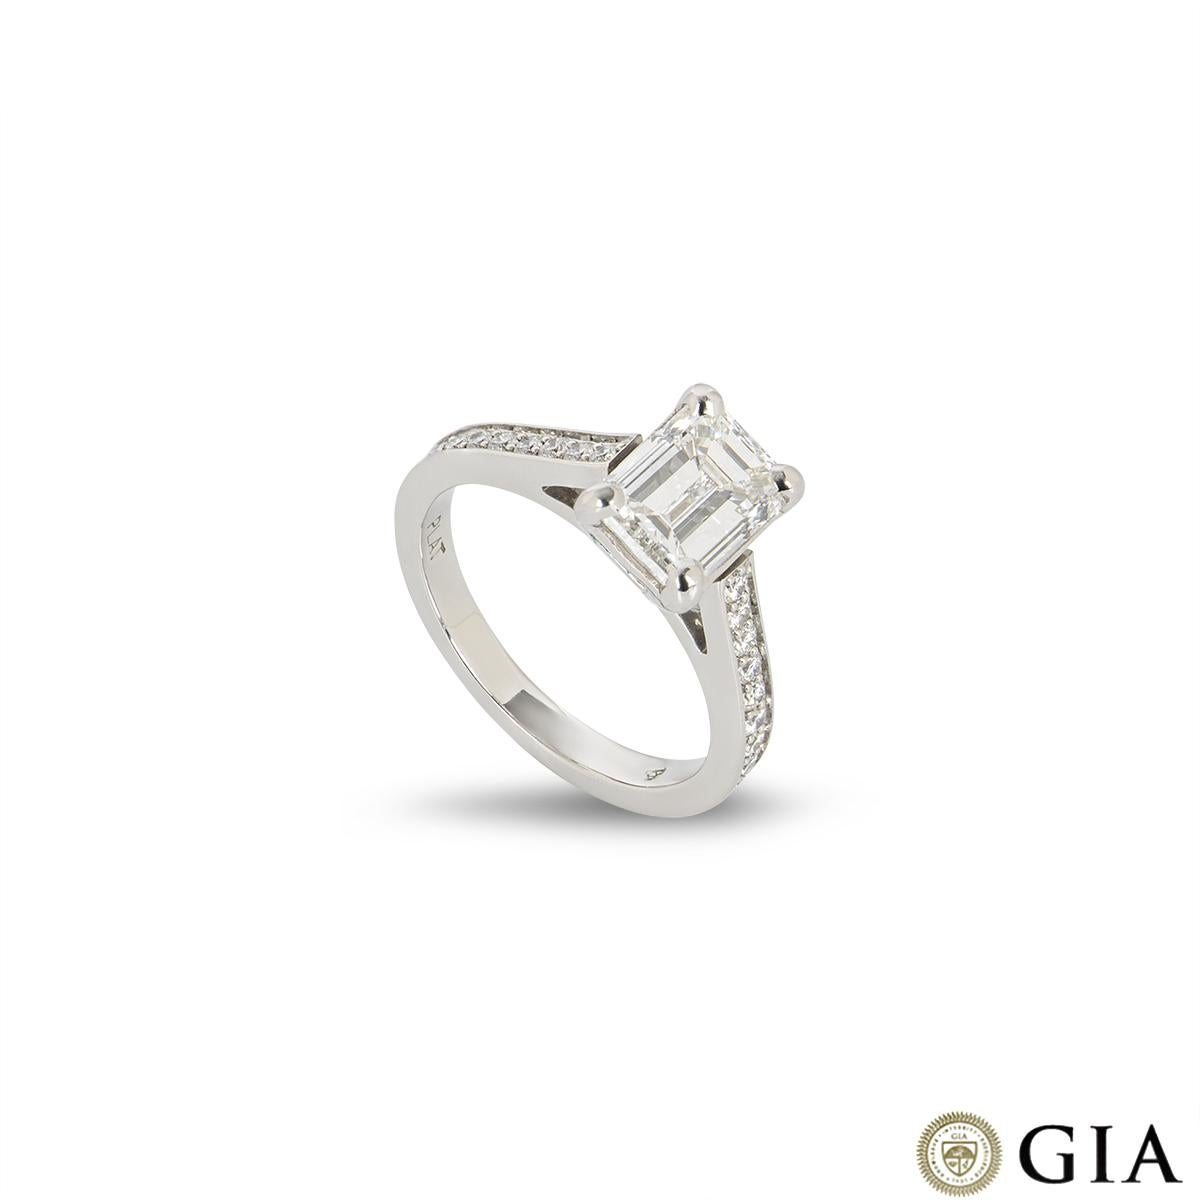 A beautiful diamond platinum engagement ring. The ring comprises of a emerald cut diamond with a weight of 1.51ct, F colour and VVS2 clarity in a 4 claw setting. Complementing this centre diamond are 9 round brilliant cut diamonds on each shoulder